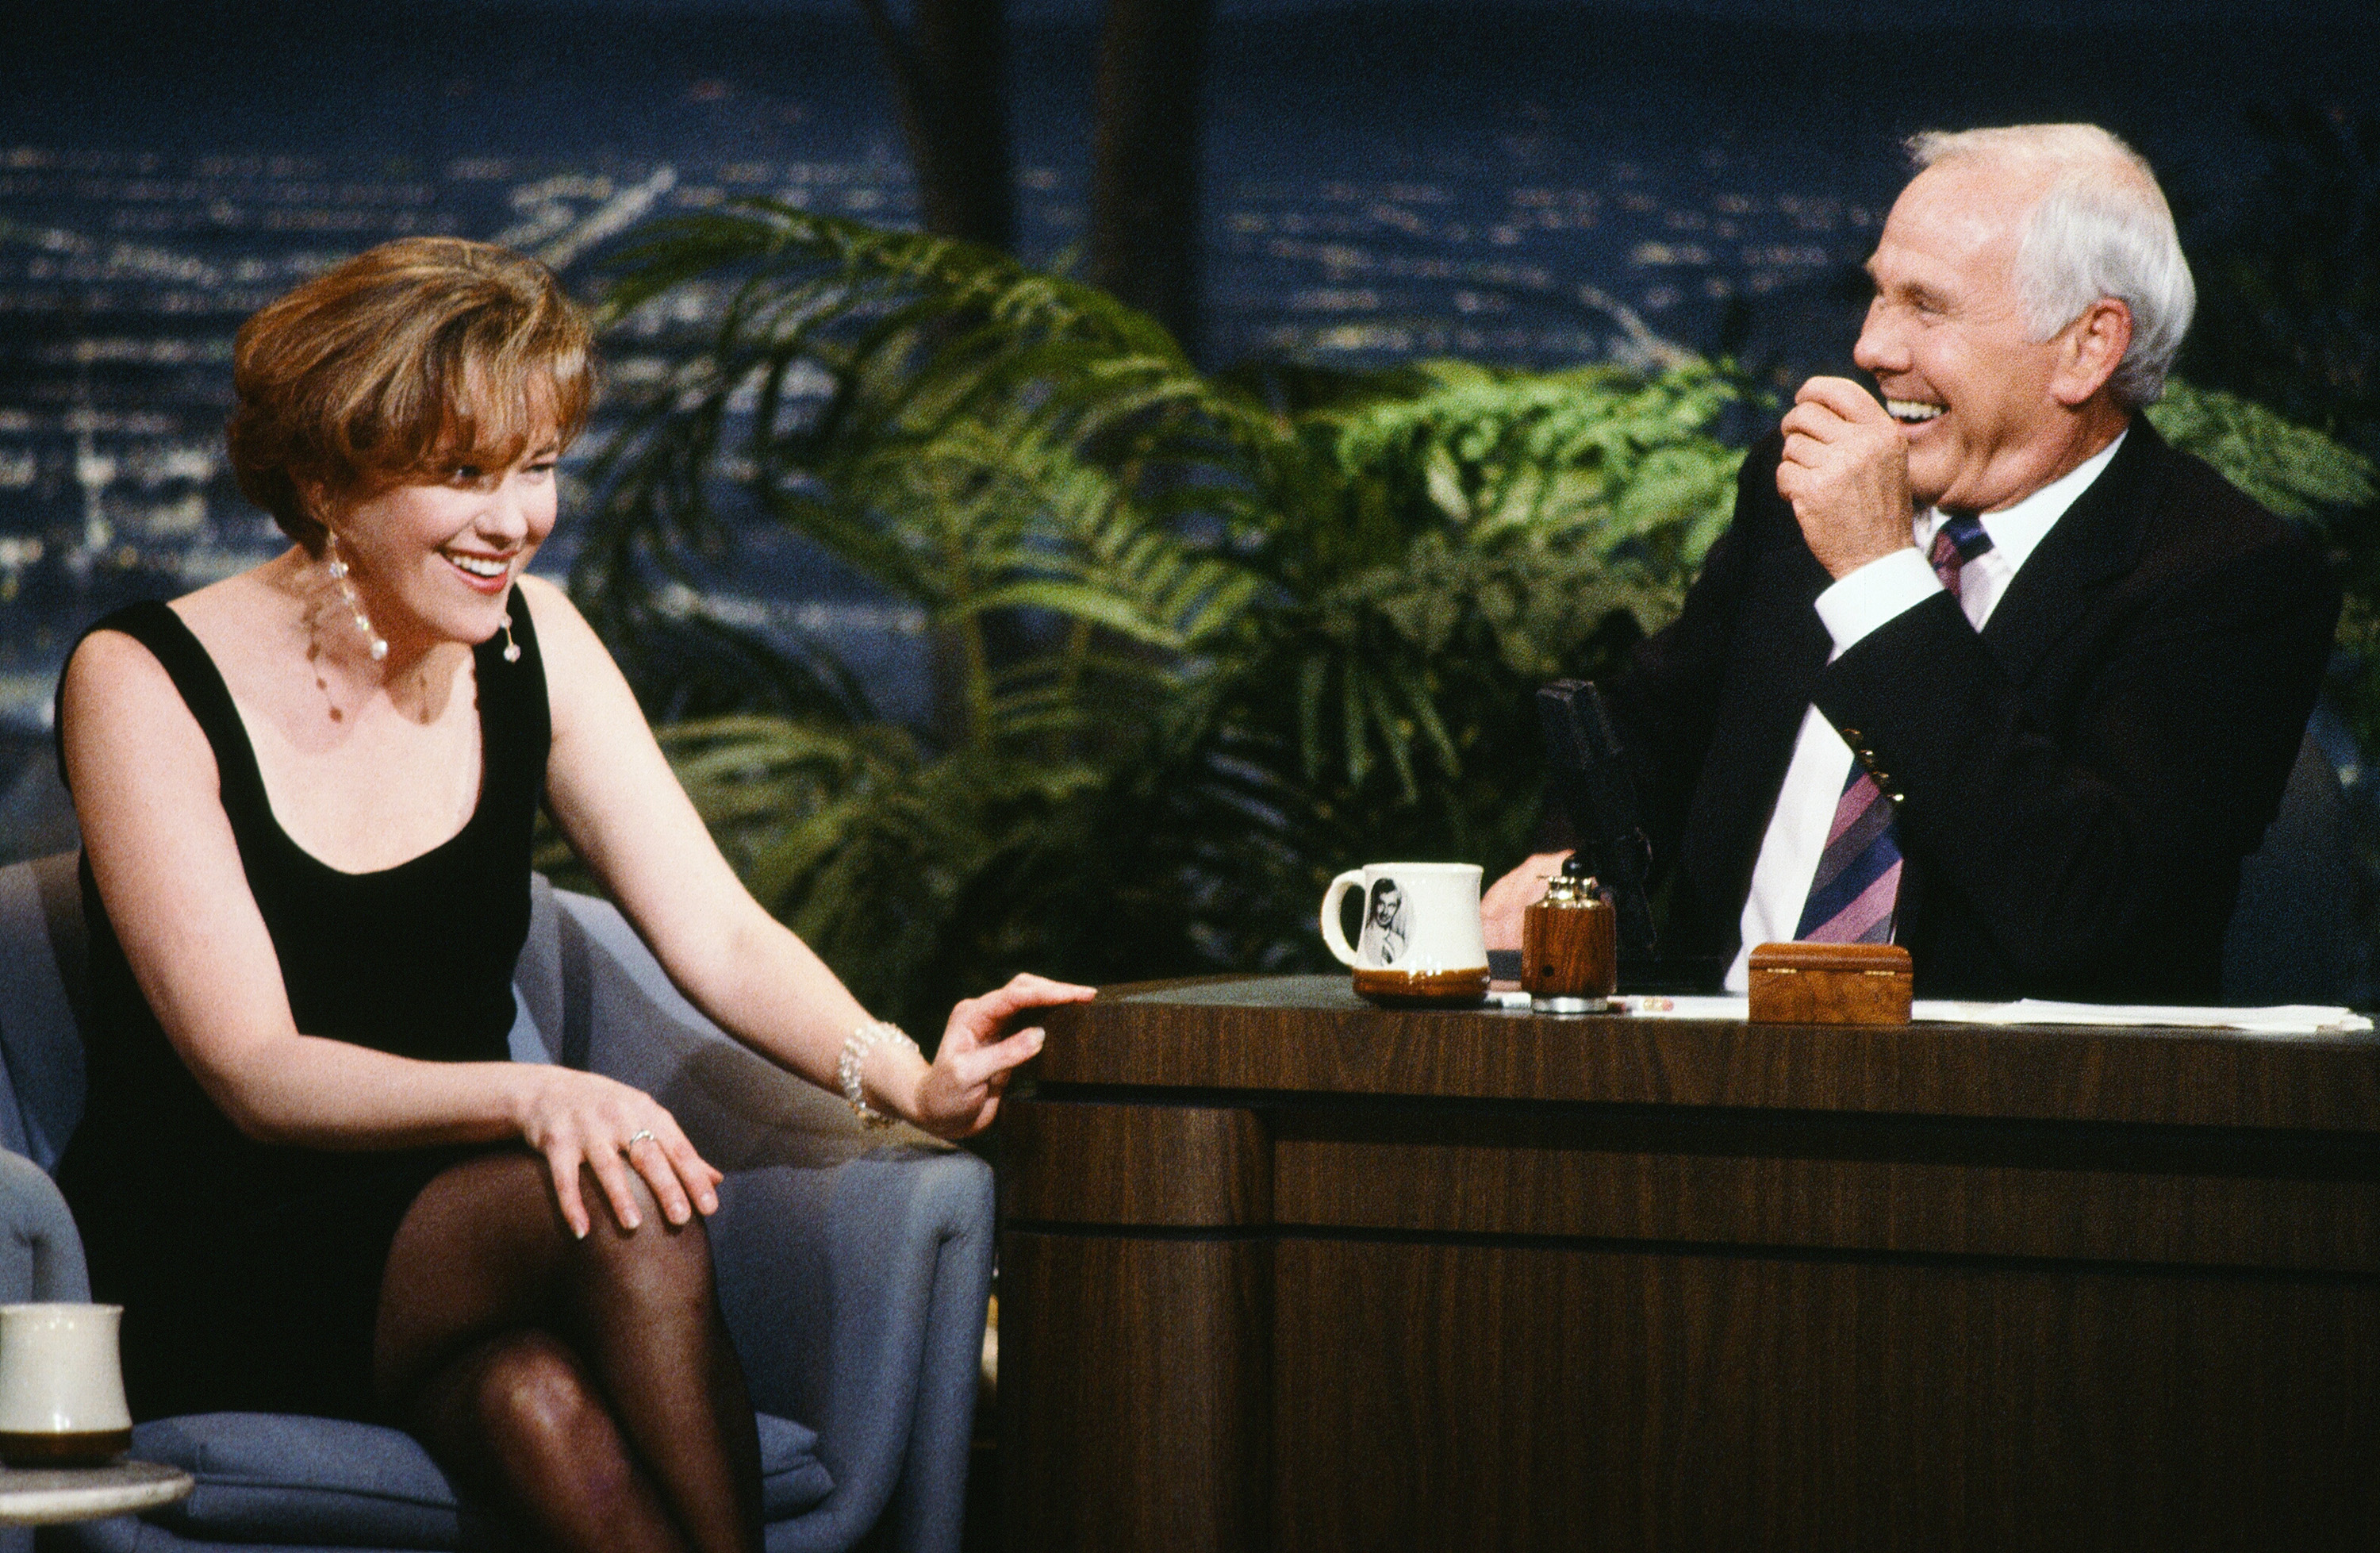 Catherine O'Hara during an interview with host Johnny Carson on November 15, 1990 | Source: Getty Images